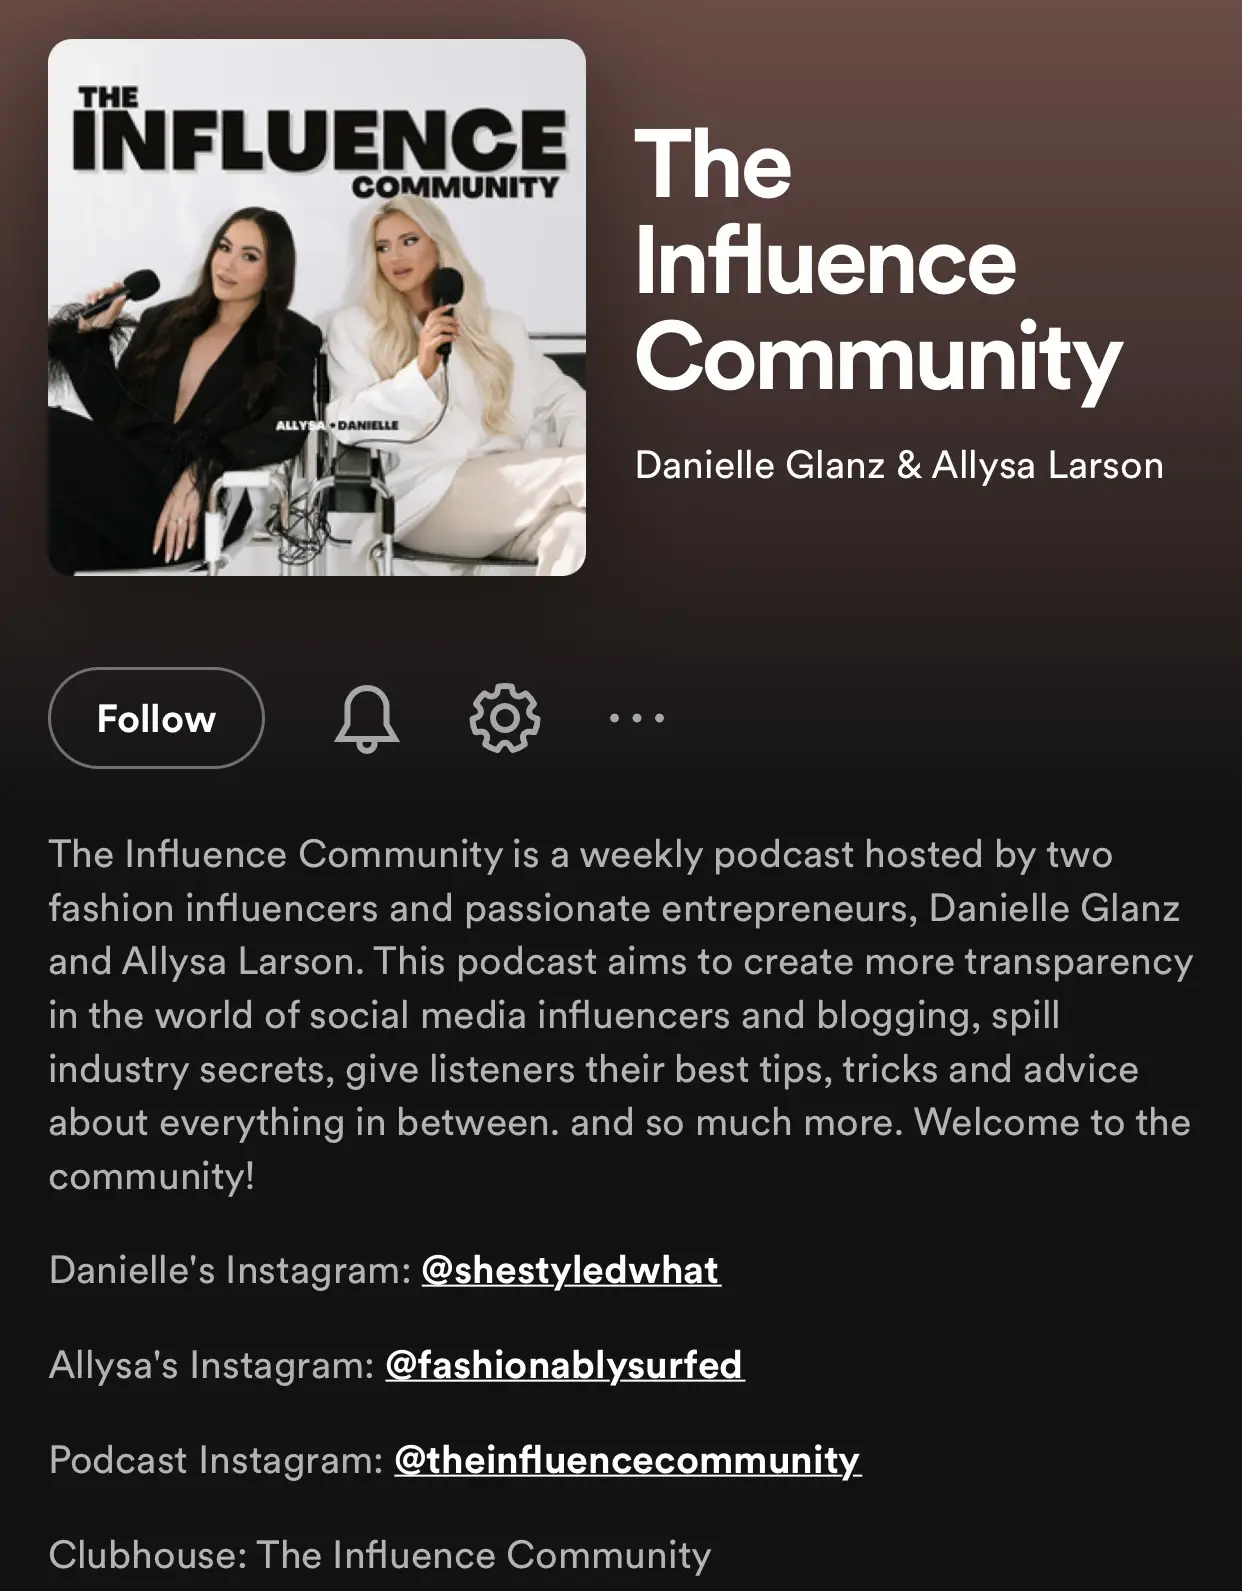  A podcast cover with two women on it.